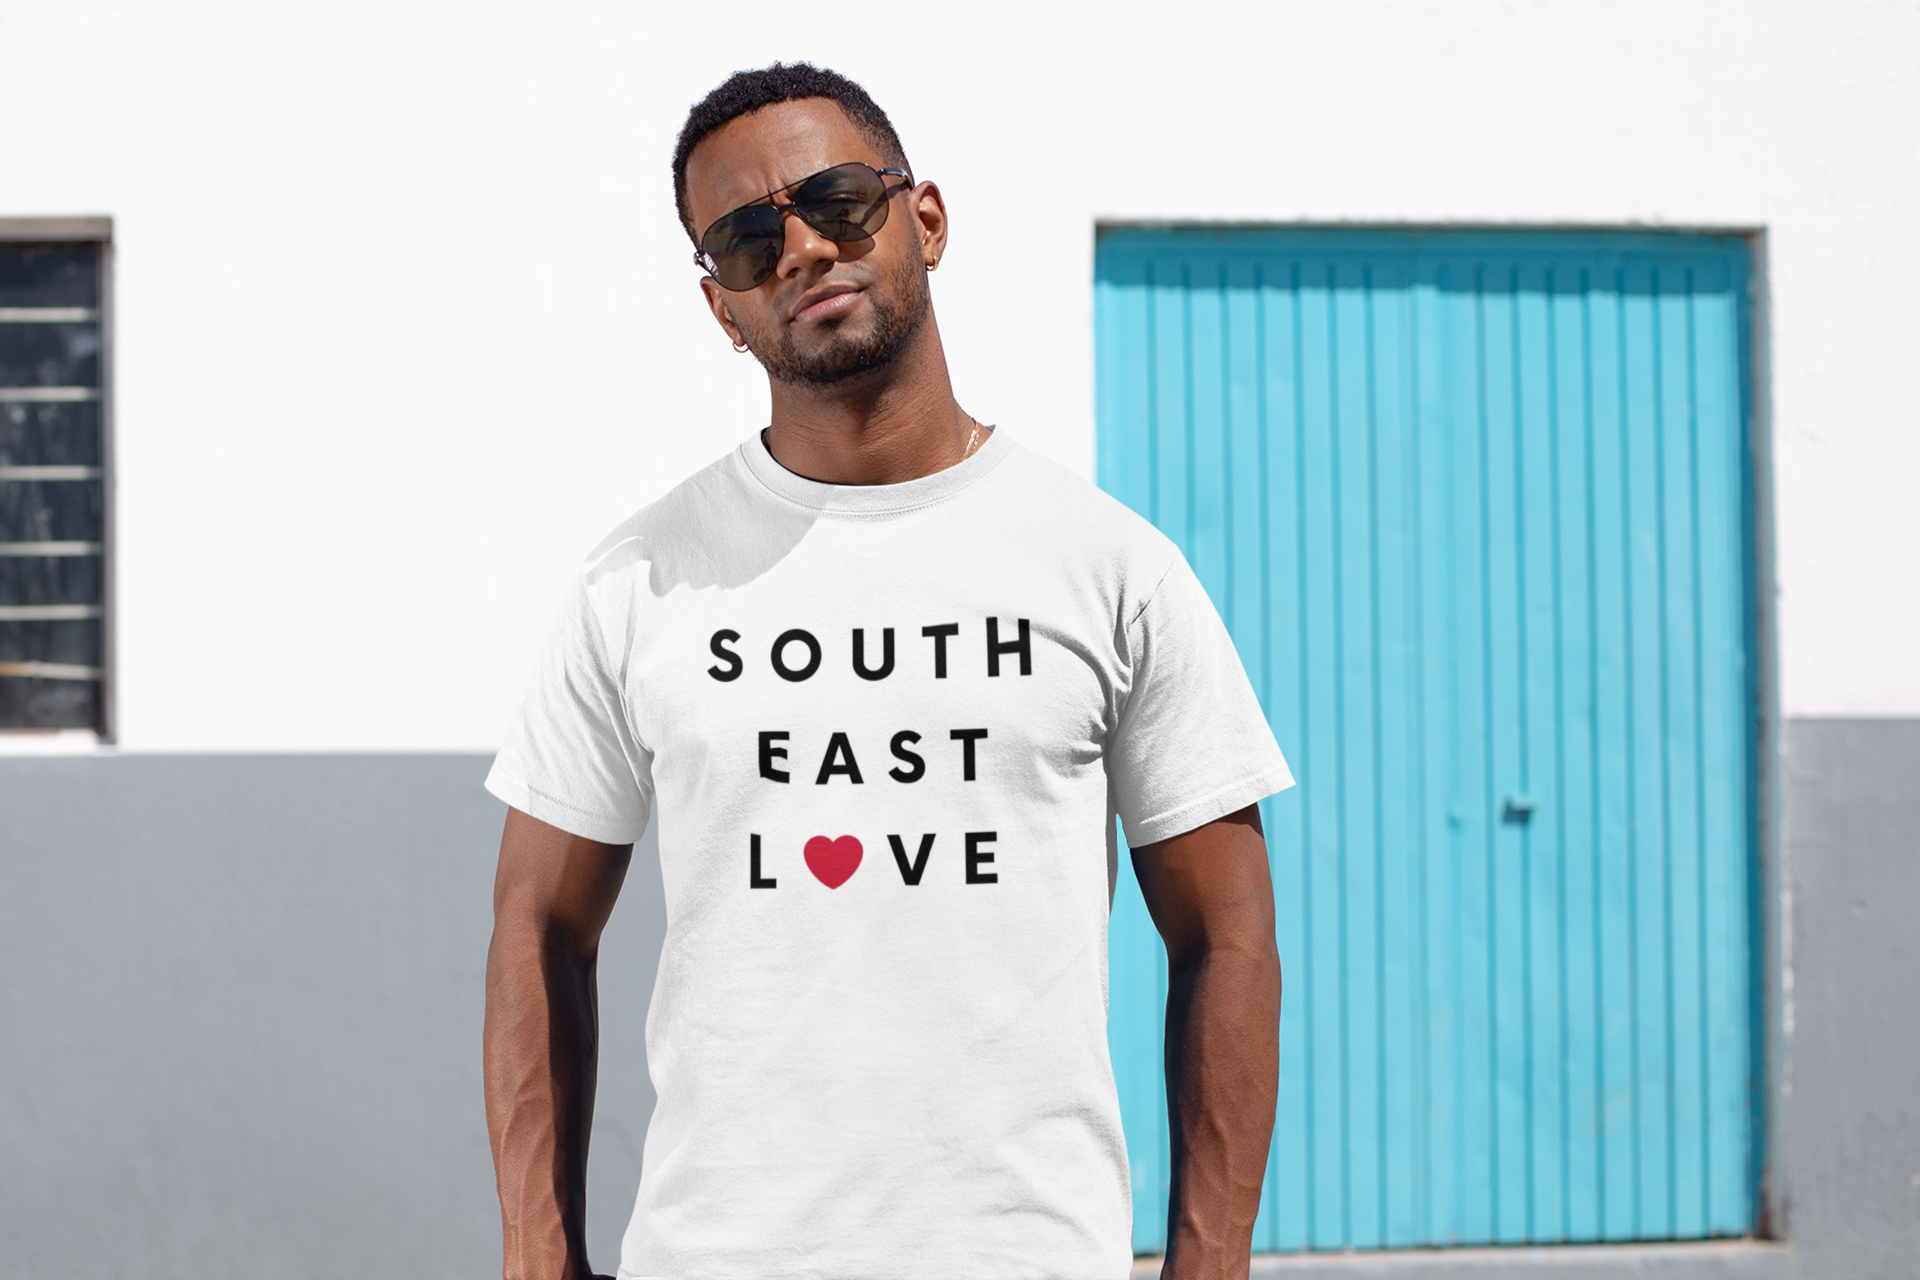 Cool guy with sunglasses standing in urban neighborhood wearing a Southeast t-shirt.